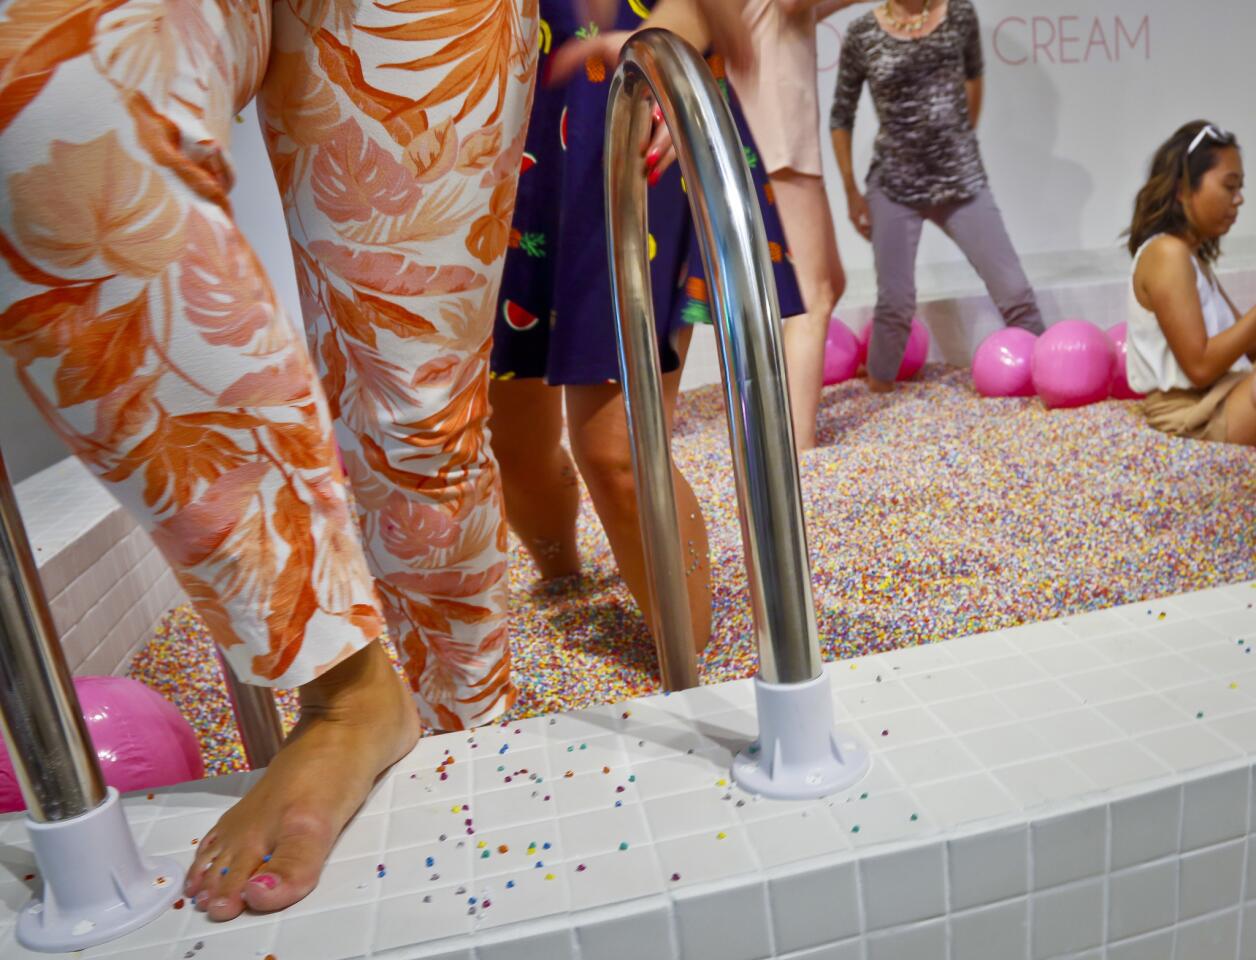 Visitors walk into a large pool filled with faux confetti-colored sprinkles, the biggest attraction of ice cream-themed works of art previewed at the Museum of Ice Cream on Thursday.